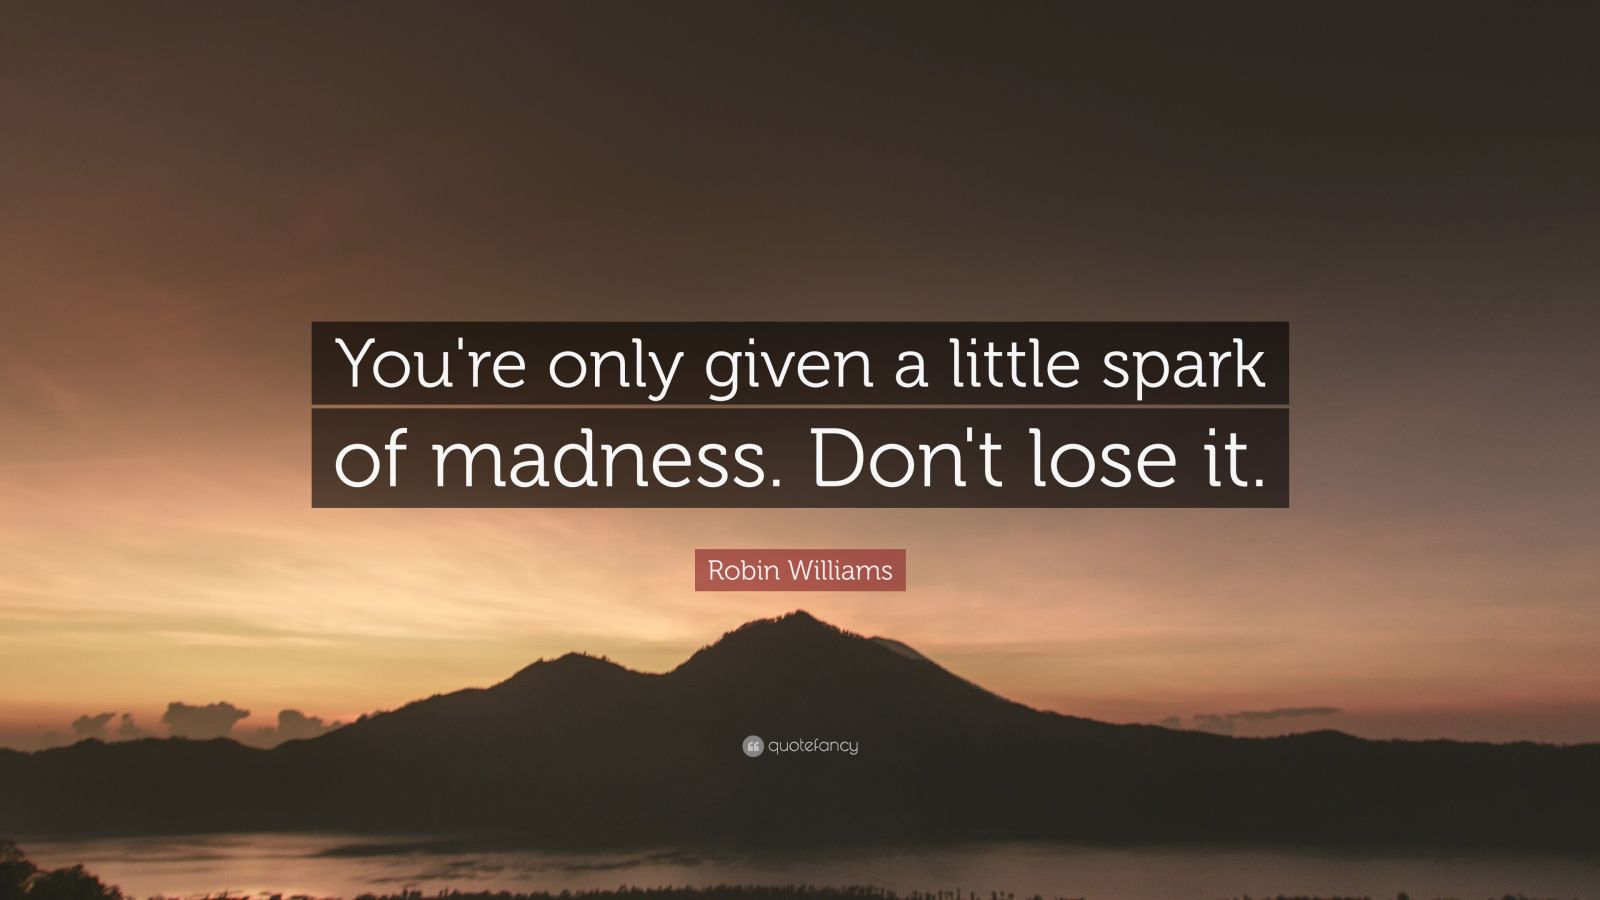 Robin Williams Quote: “You're only given a little spark of madness. Don